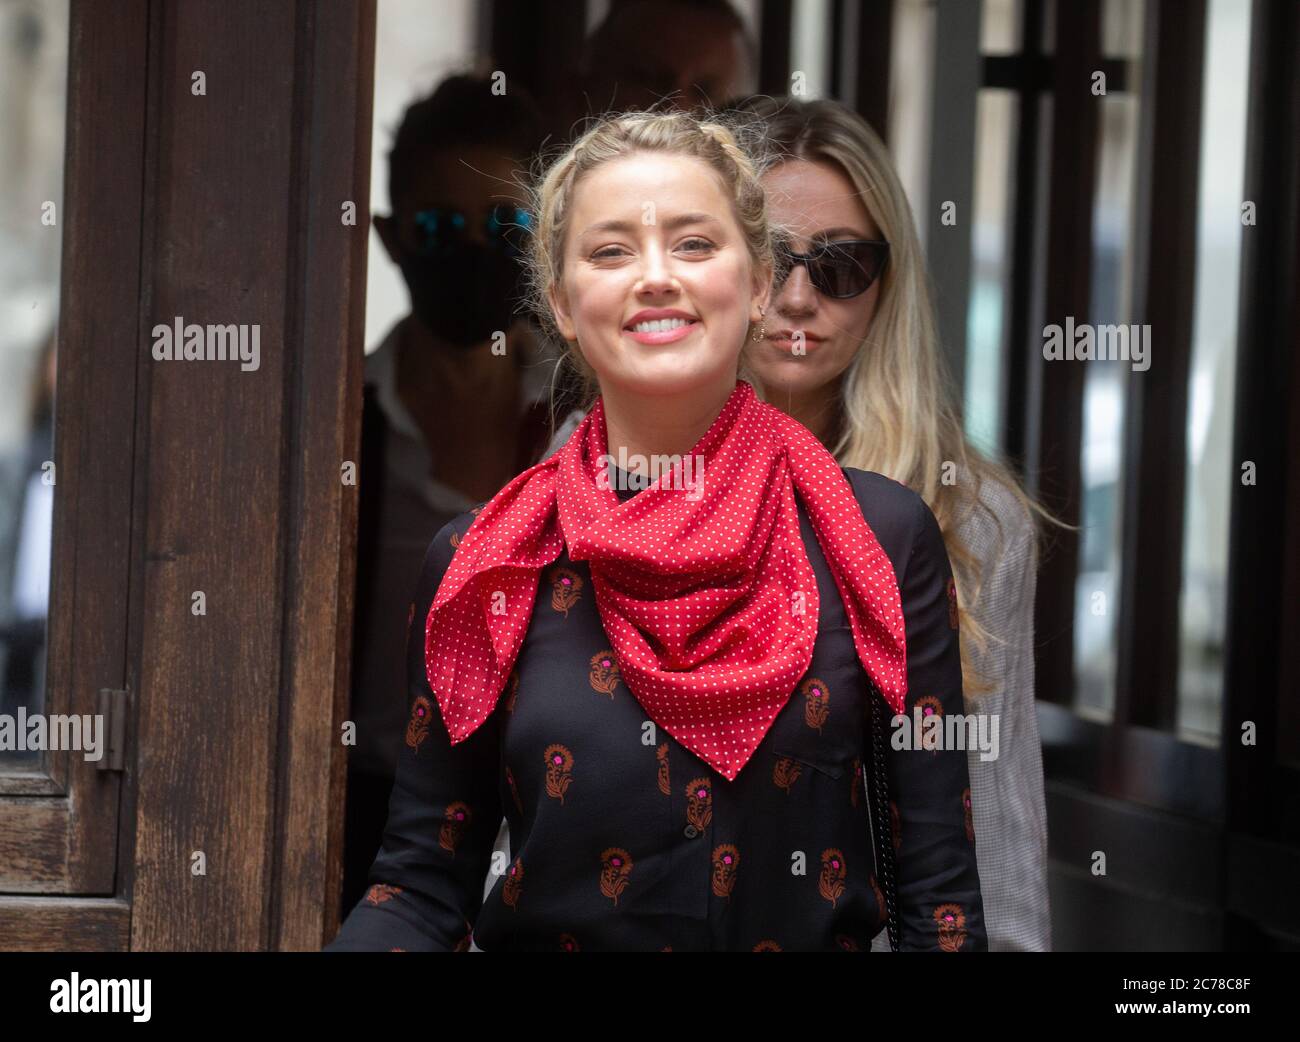 London, UK. 15th July, 2020. Johnny Depp's former wife, Amber Heard, is giving evidence about Johnny Depp's alleged violent behaviour. It has been reported that Amber Heard was the 'antagoniser' in the relationship.Credit: Tommy London/Alamy Live News Stock Photo